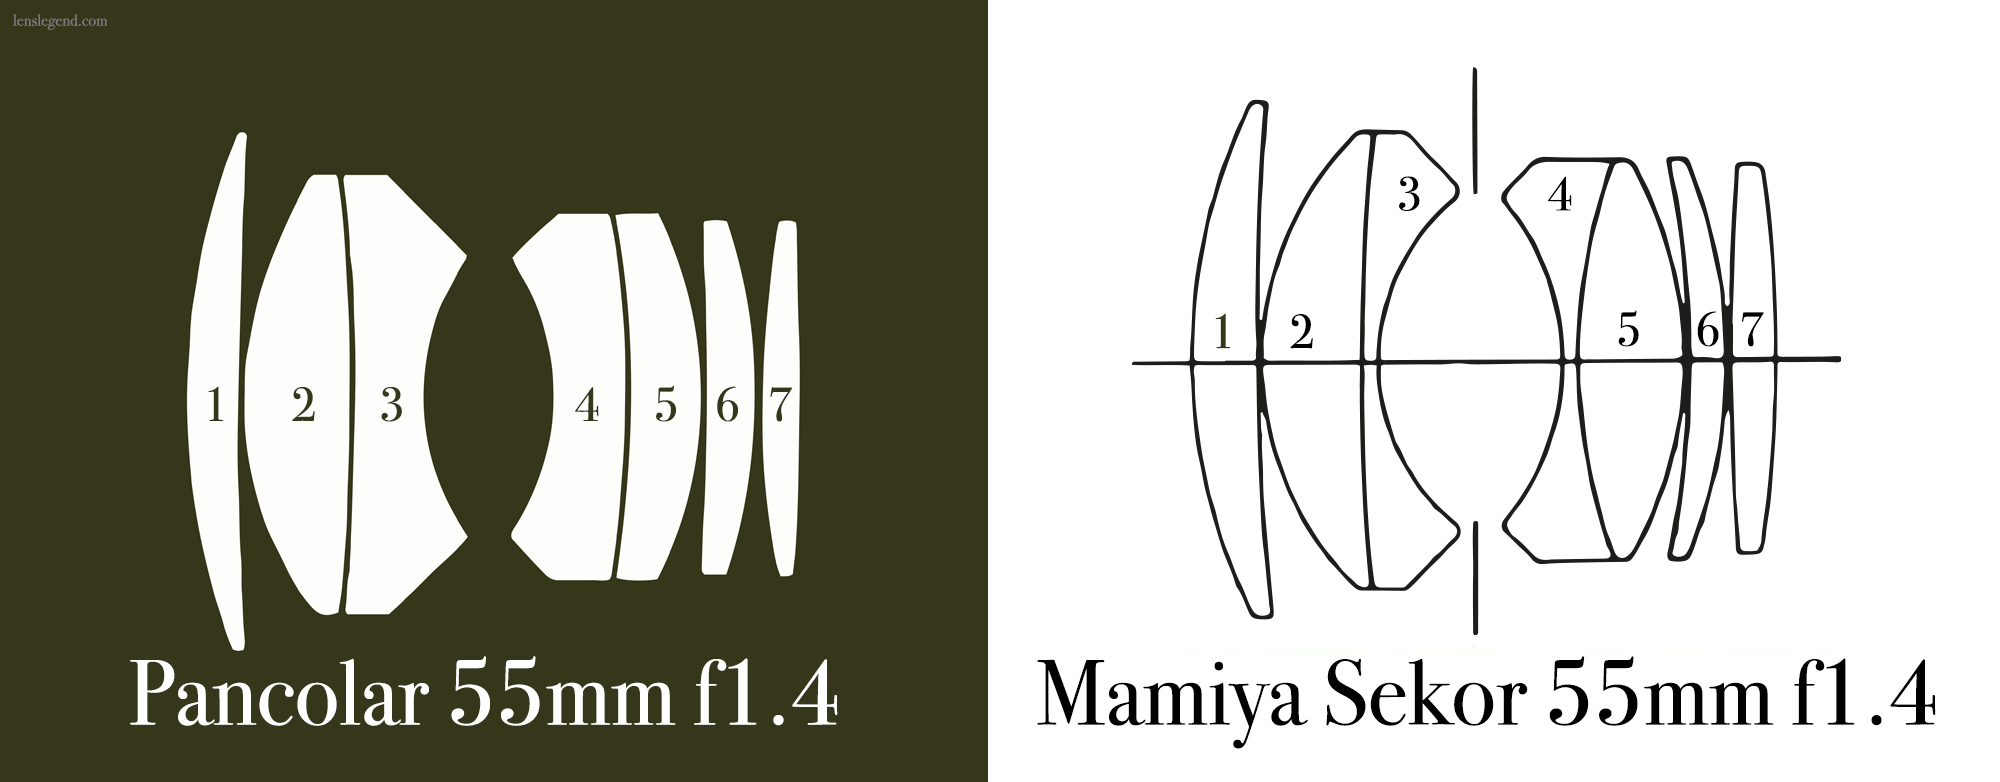 Comparison of Mamiya Sekor 55mm f1.4 schema with the Carl Zeiss Jena Pancolar 55mm f1.4